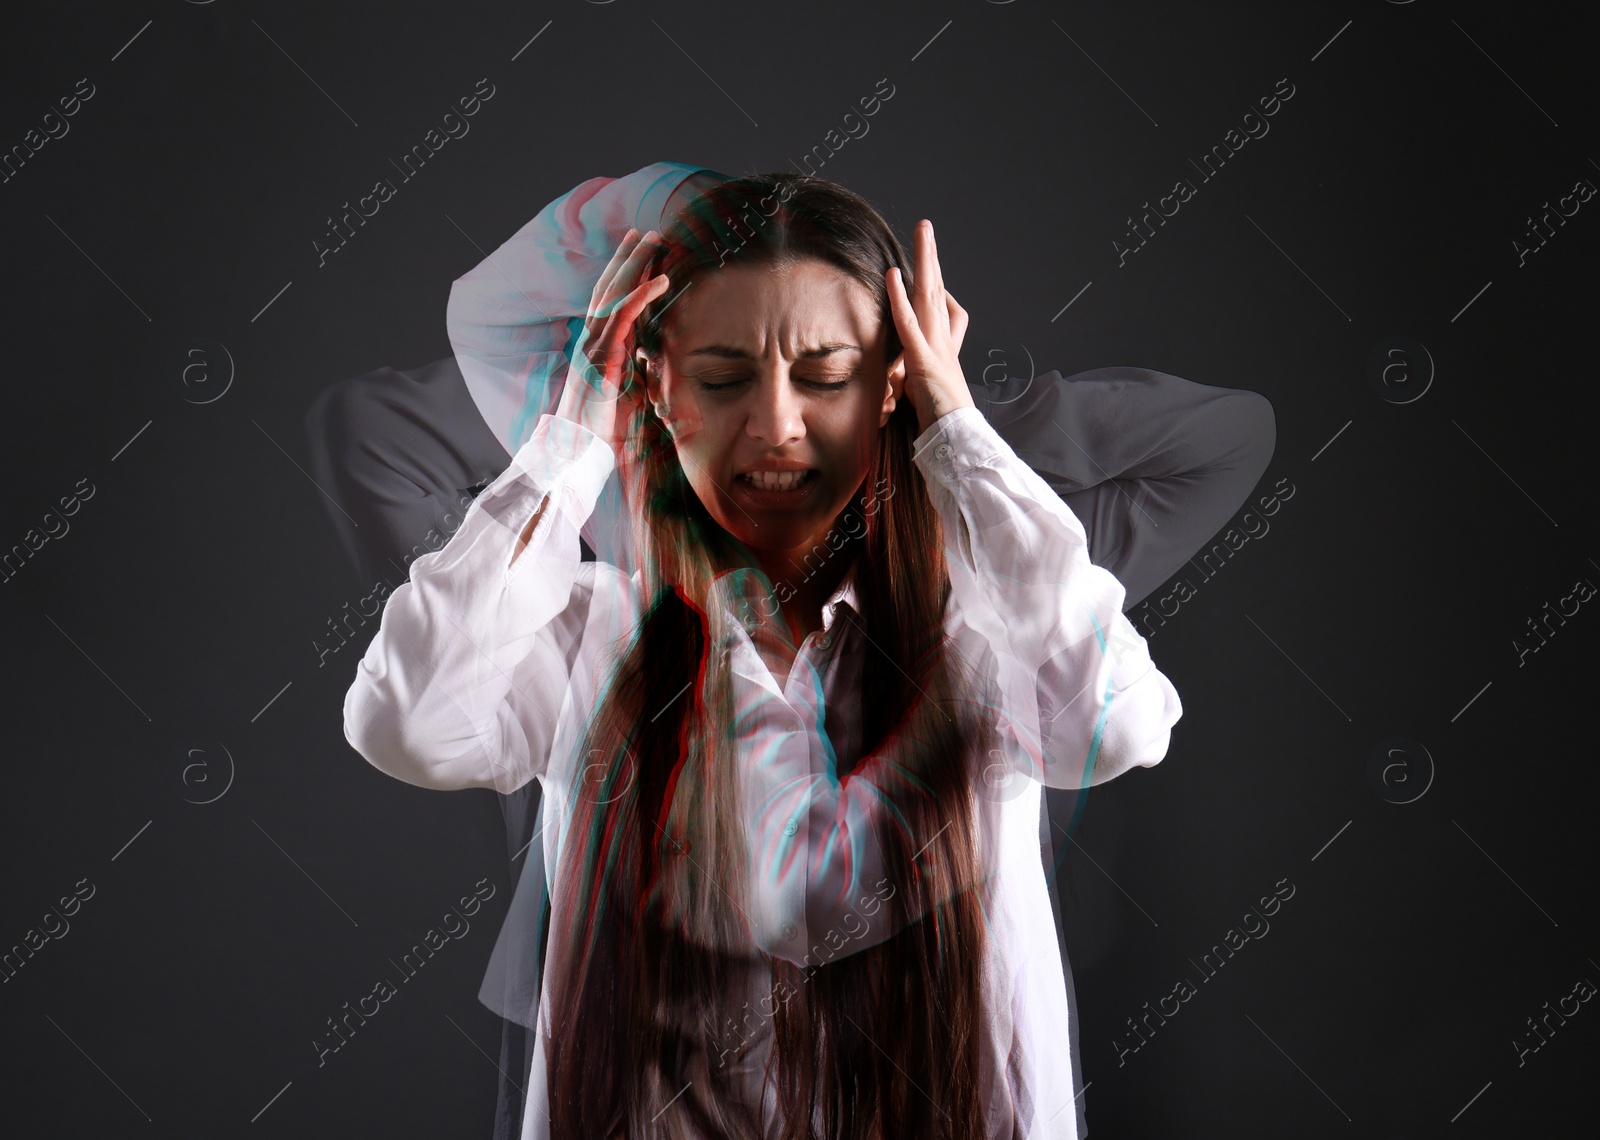 Image of Woman suffering from paranoia on dark background. Multiple exposure with photos showing emotional instability